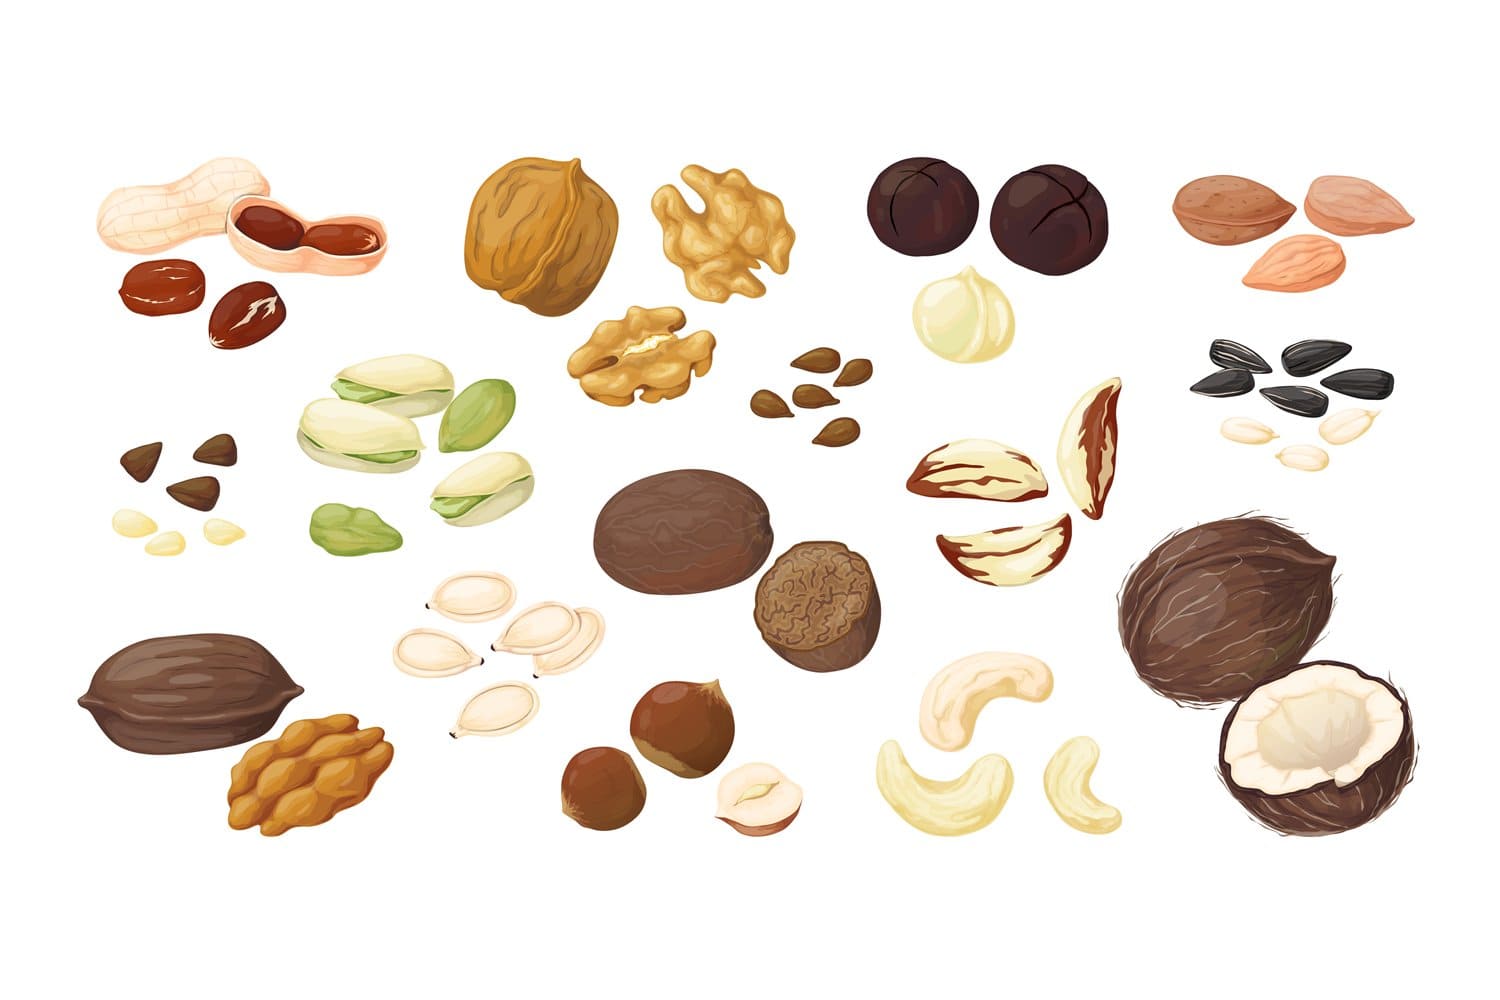 Cartoon nuts are drawn in realistic colors.